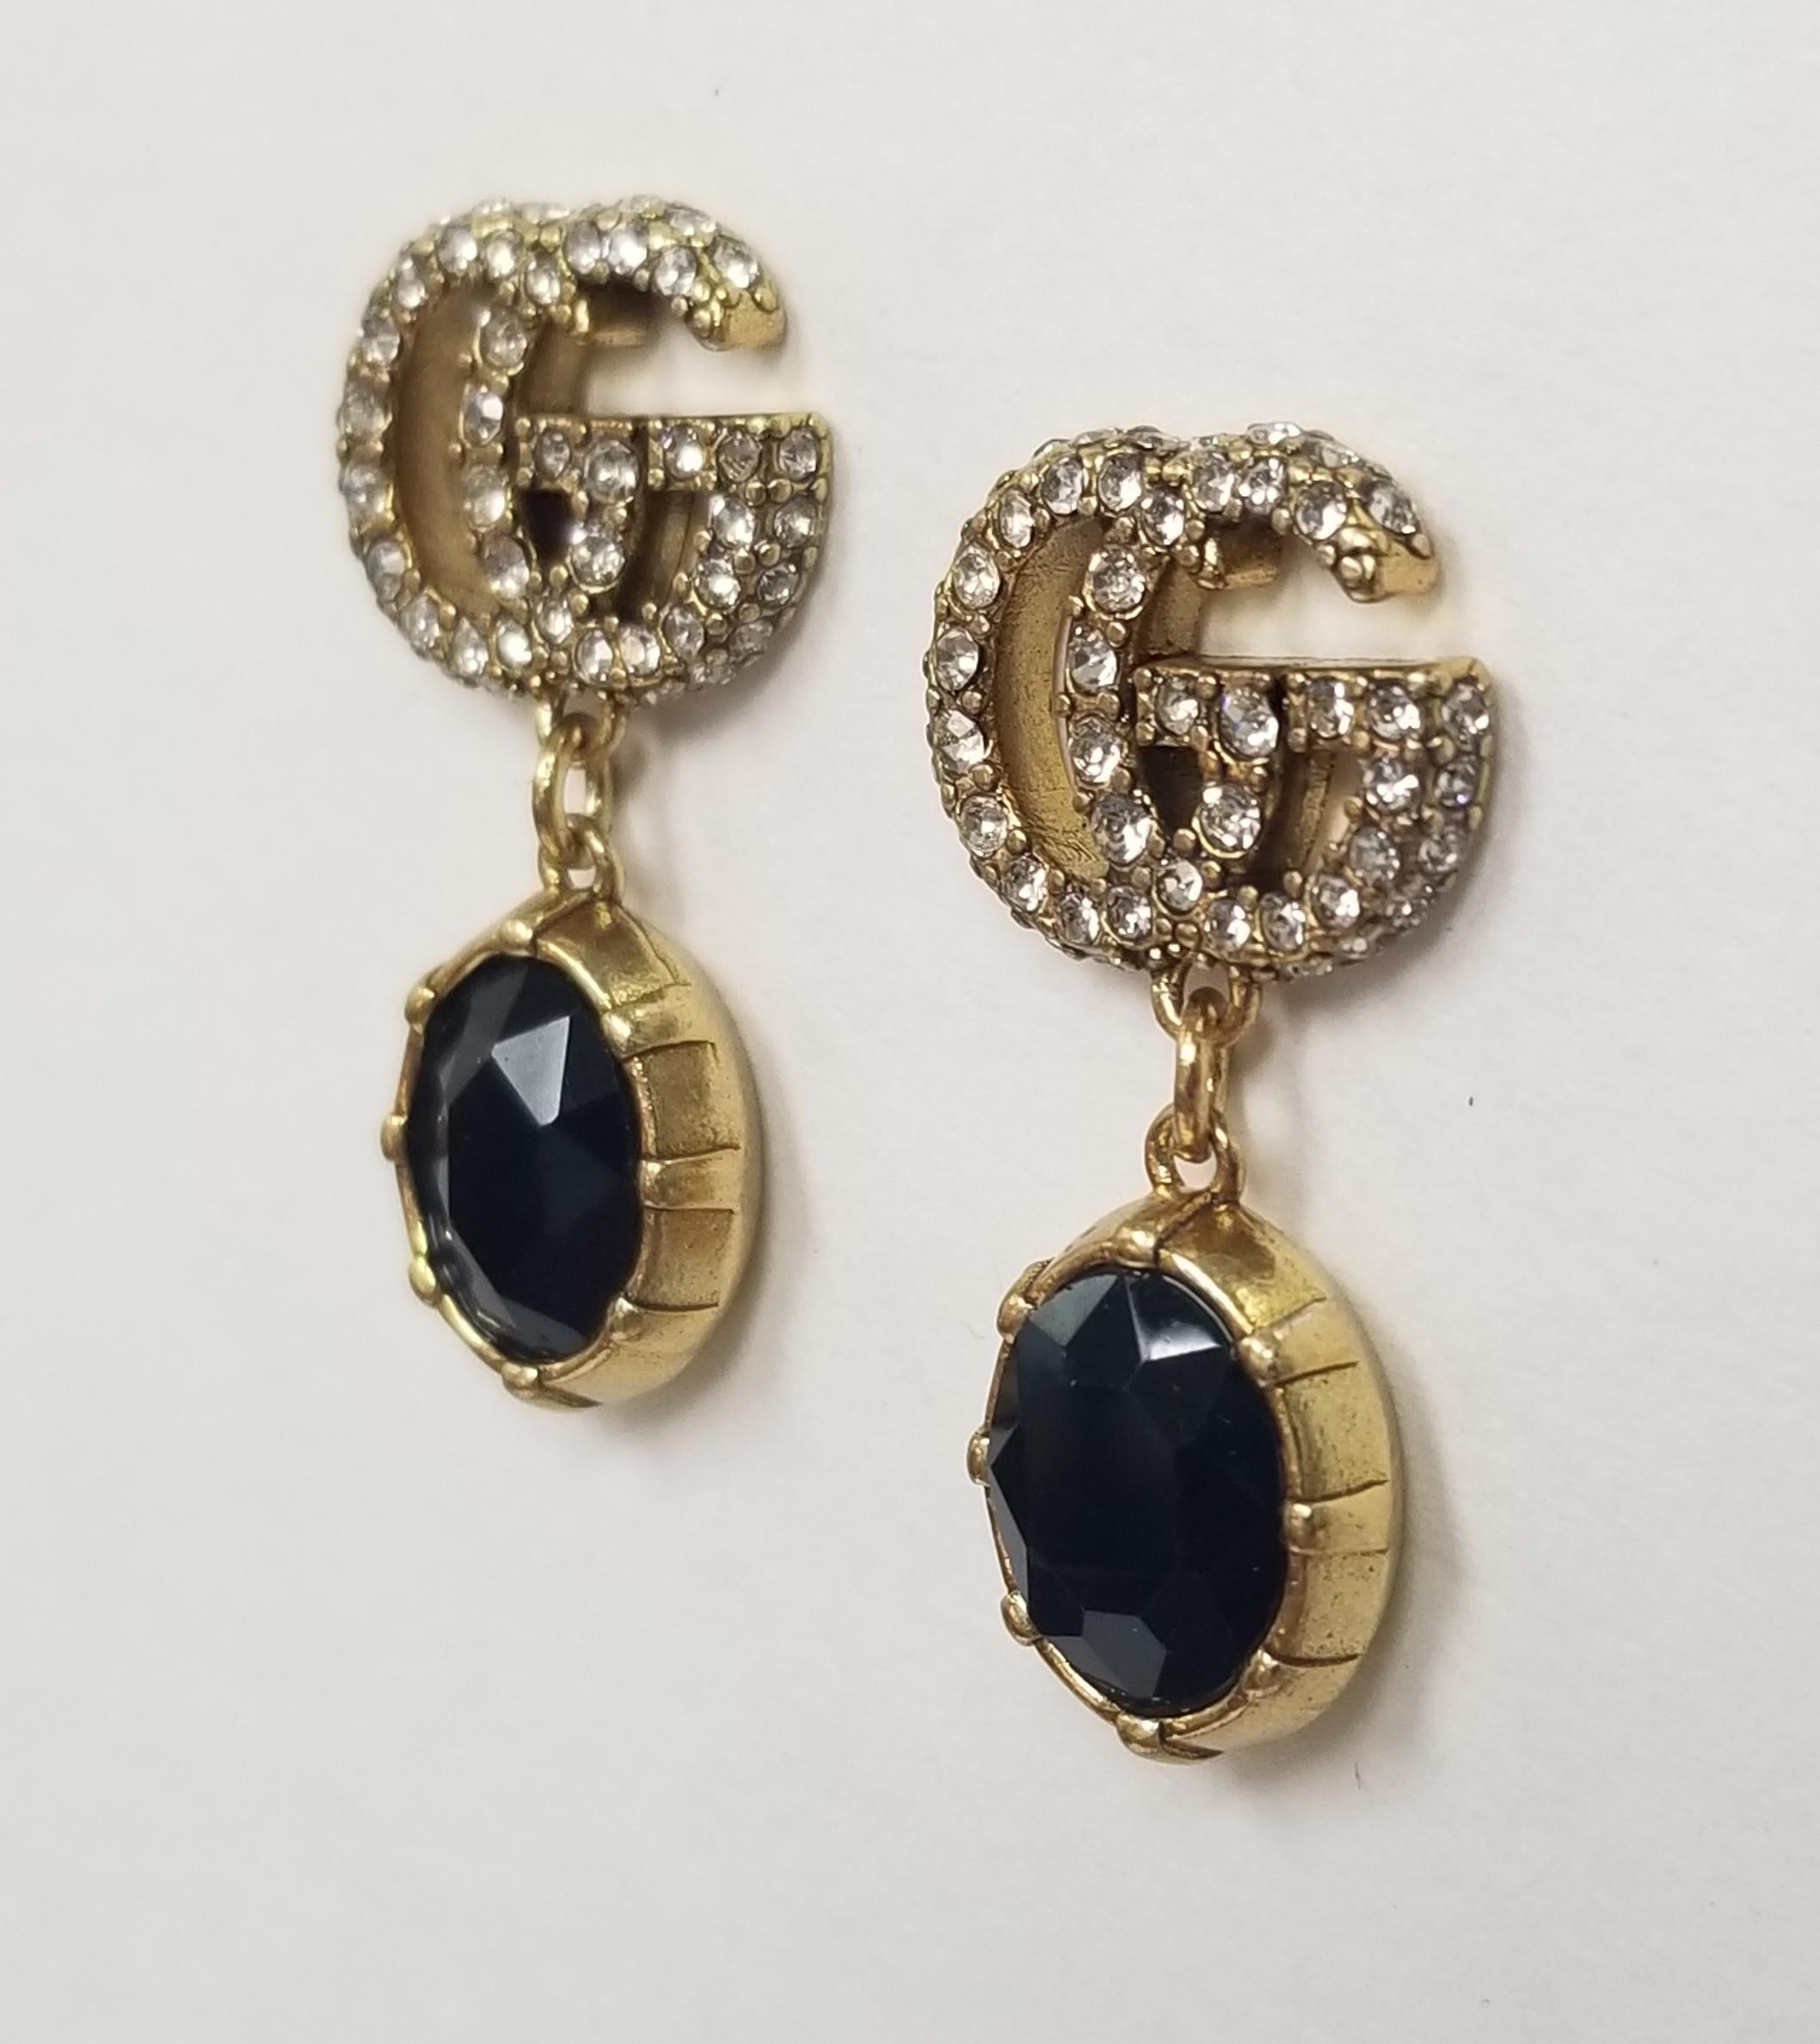  A black faceted crystal pendant combines with the crystal Double G detail, forming a sparkling pendant that completes these earrings in aged gold-toned metal.

    Metal with aged gold finish
    Crystal encrusted Double G detail
    Black crystal